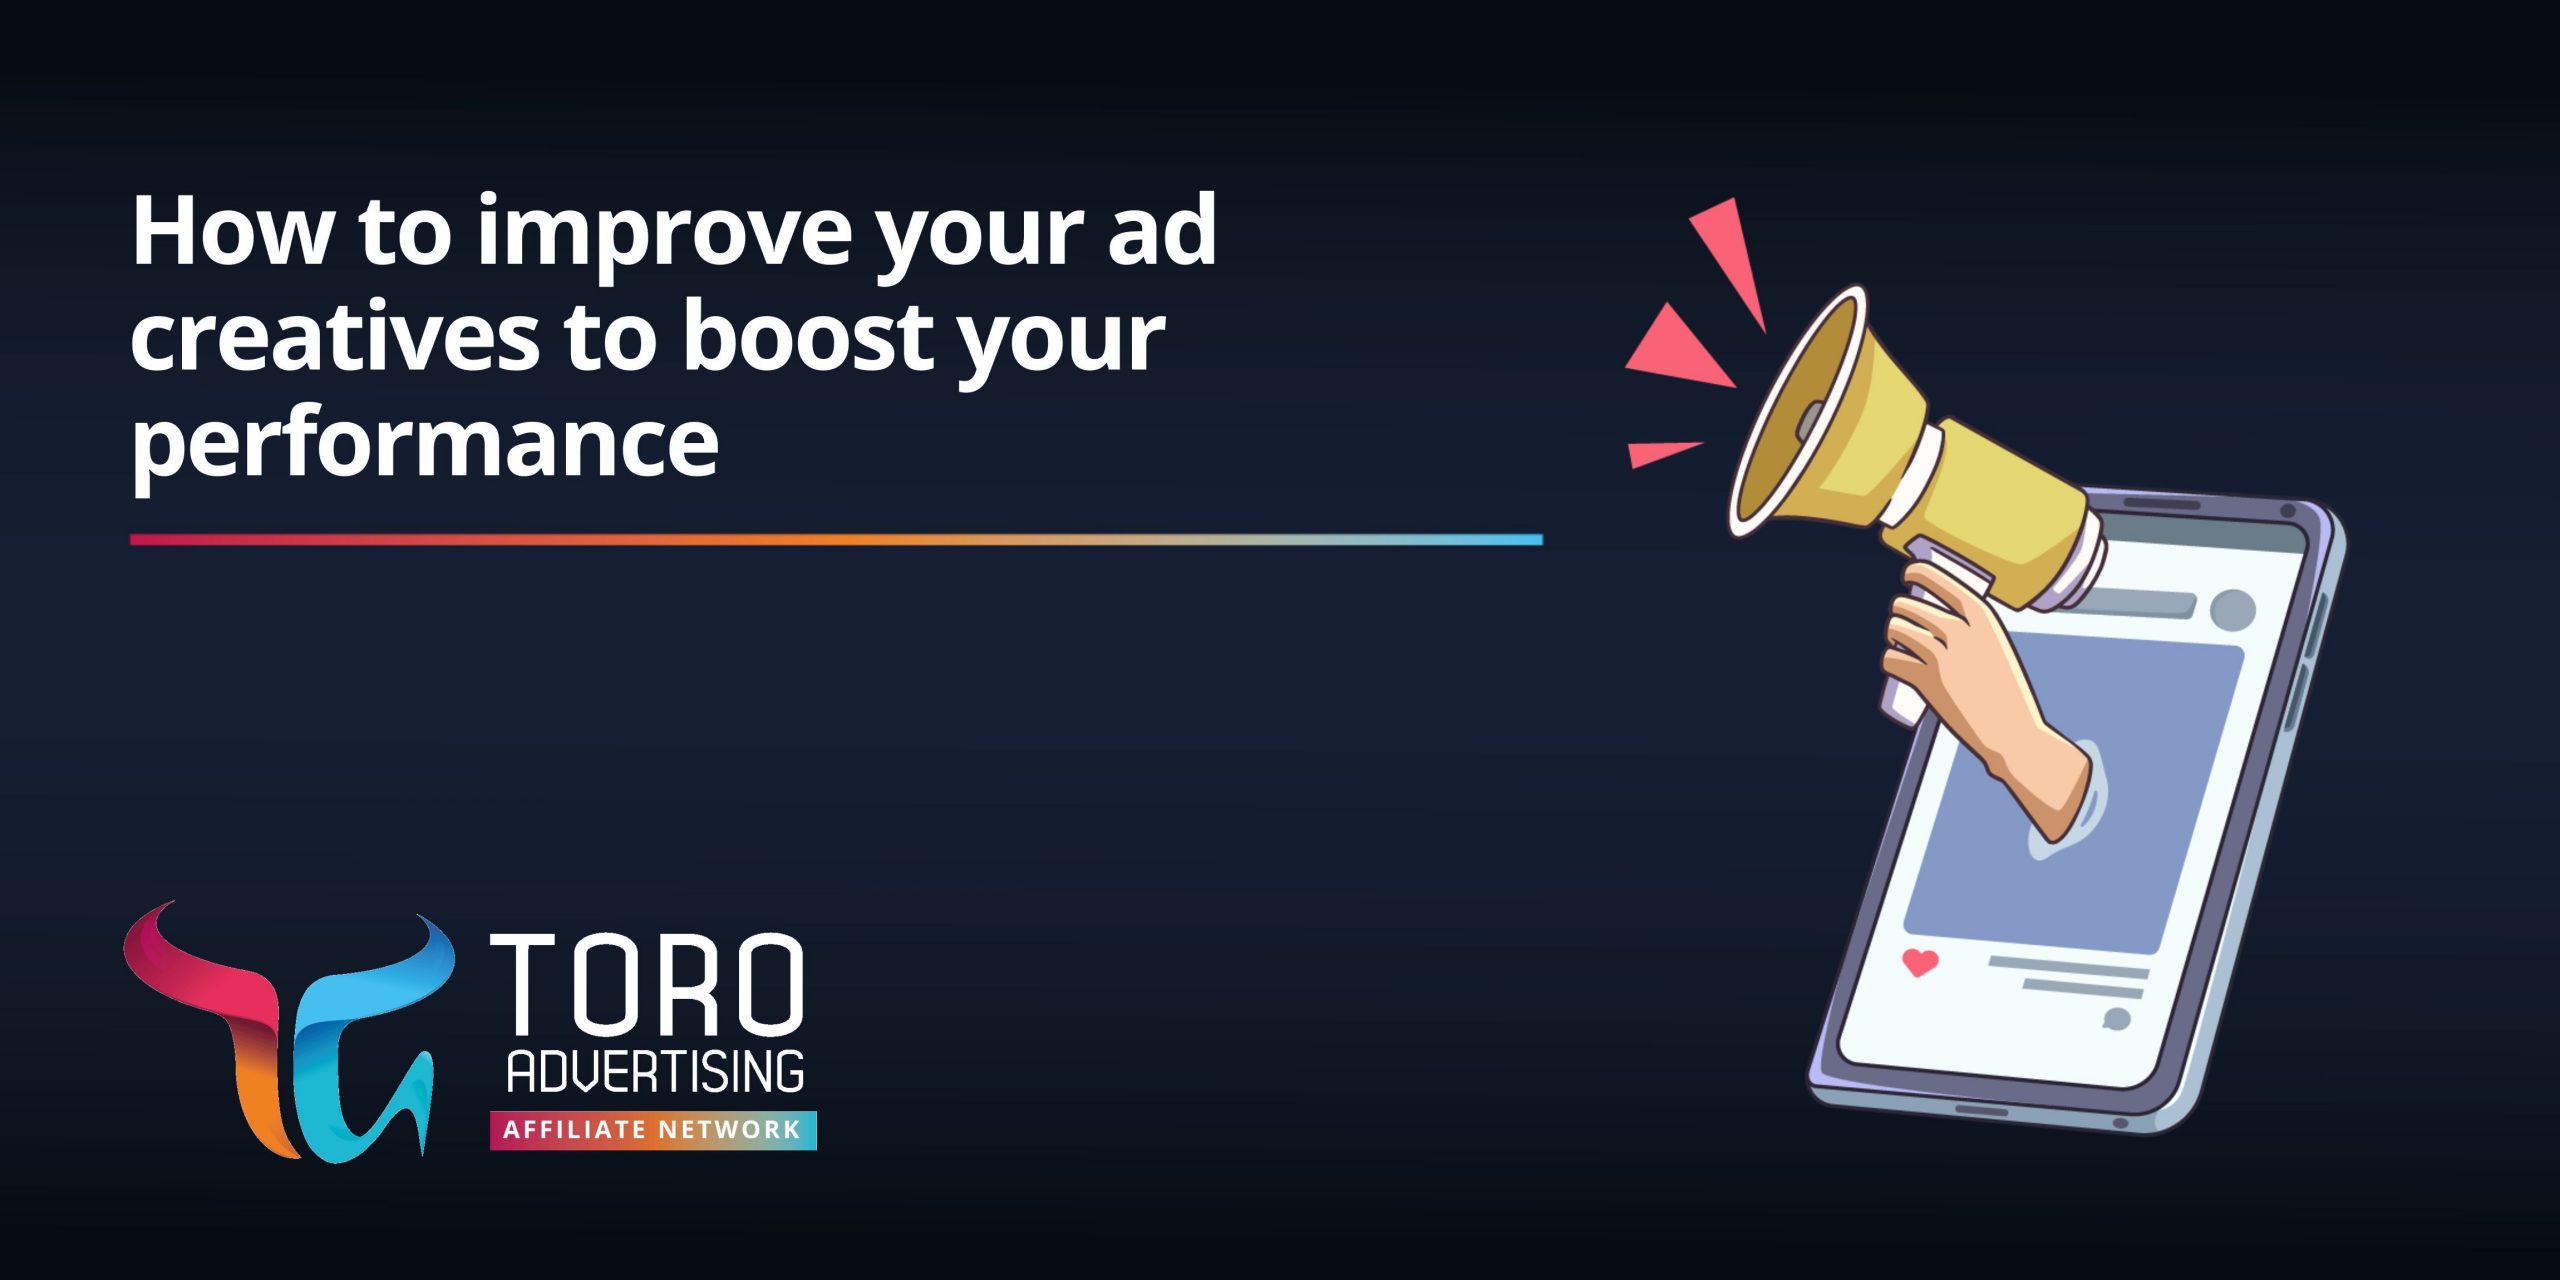 How to improve your ad creatives to boost your performance